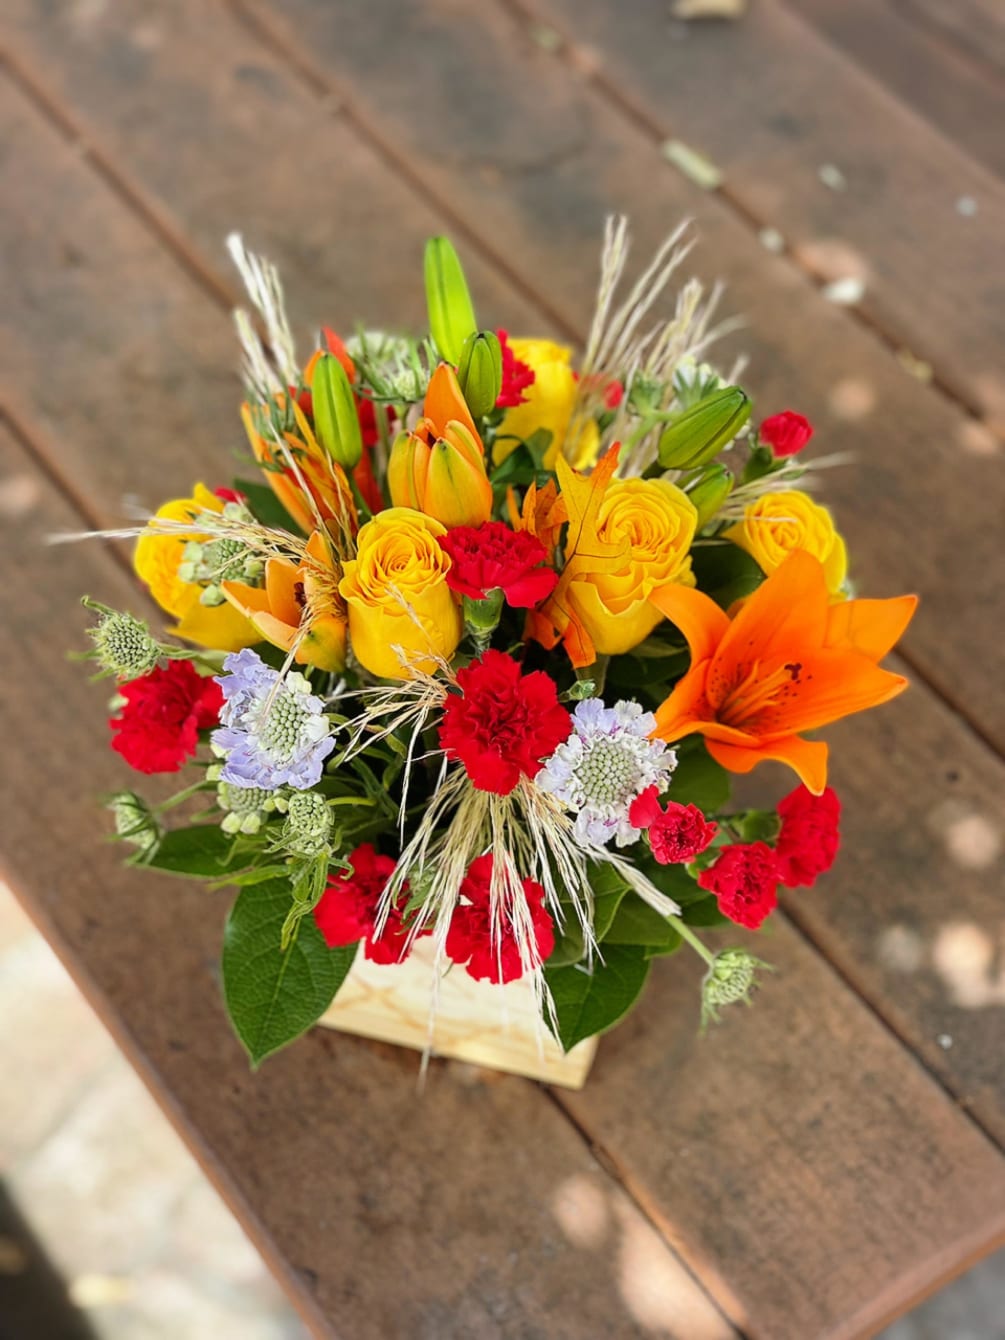 - 2 Orange Lilies
- 6 Yellow Roses
- 5 Red Carnations
- White Fillers
-